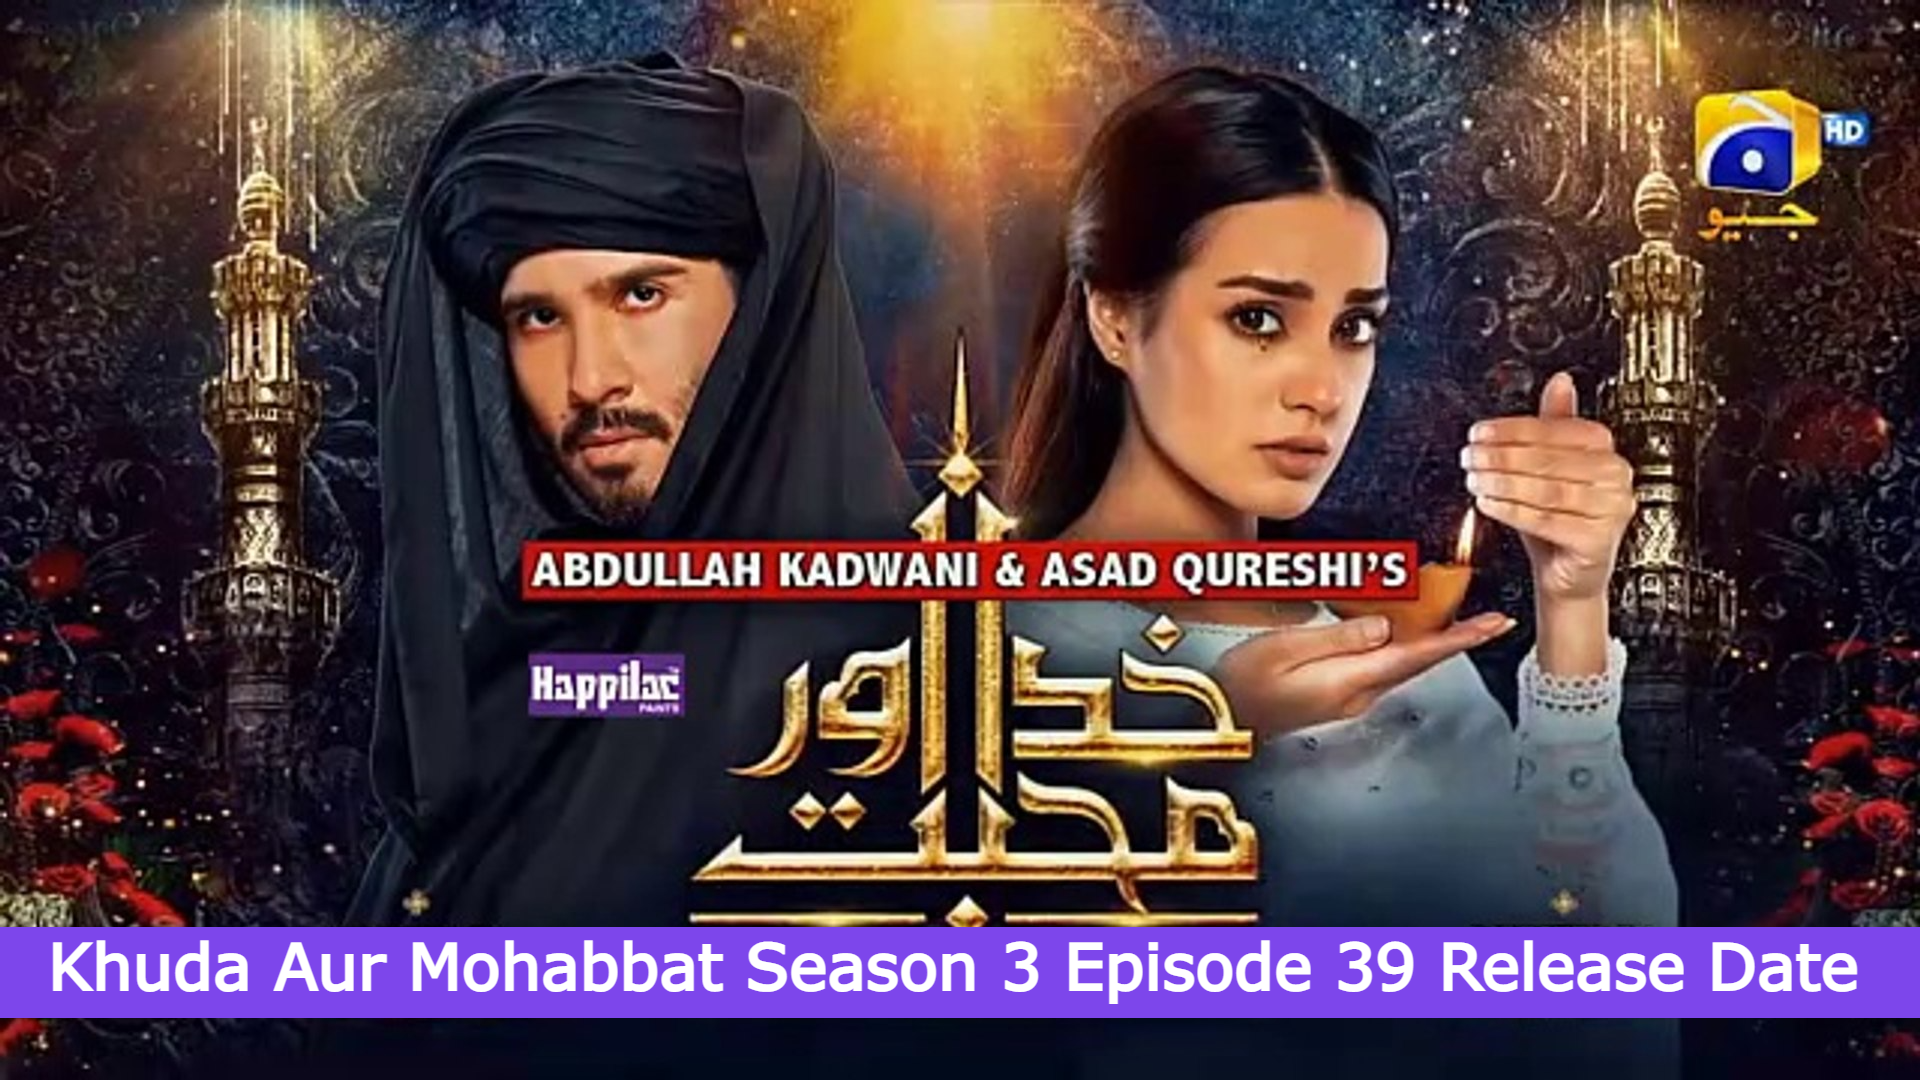 Khuda Aur Mohabbat Season 3 Episode 39 Release Date and Time, Cast, Trailer, Episode List, When Is Coming Out?